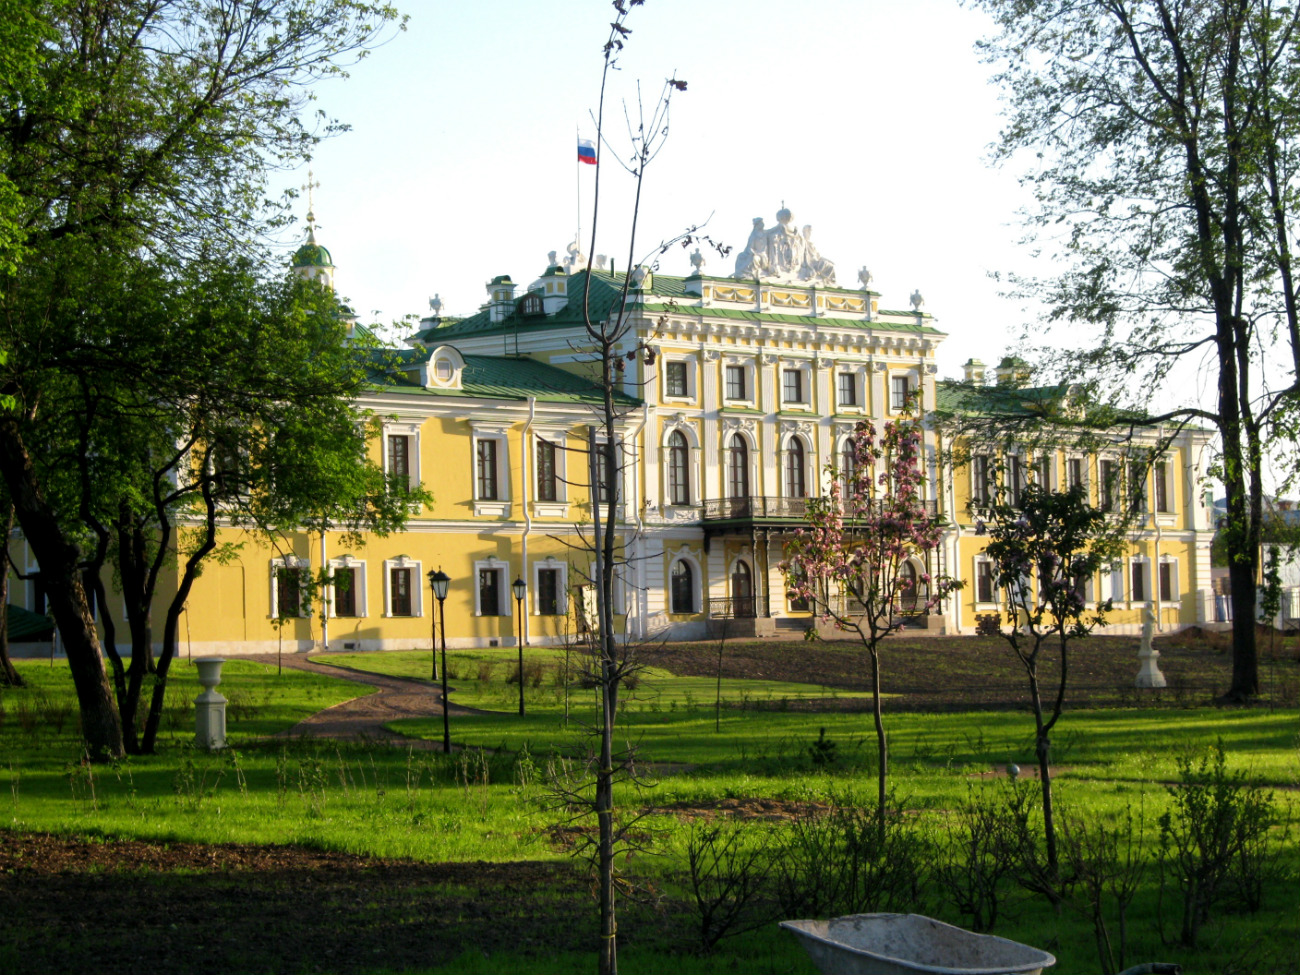 Travel Palace in Tver (this picture was taken in 2016).